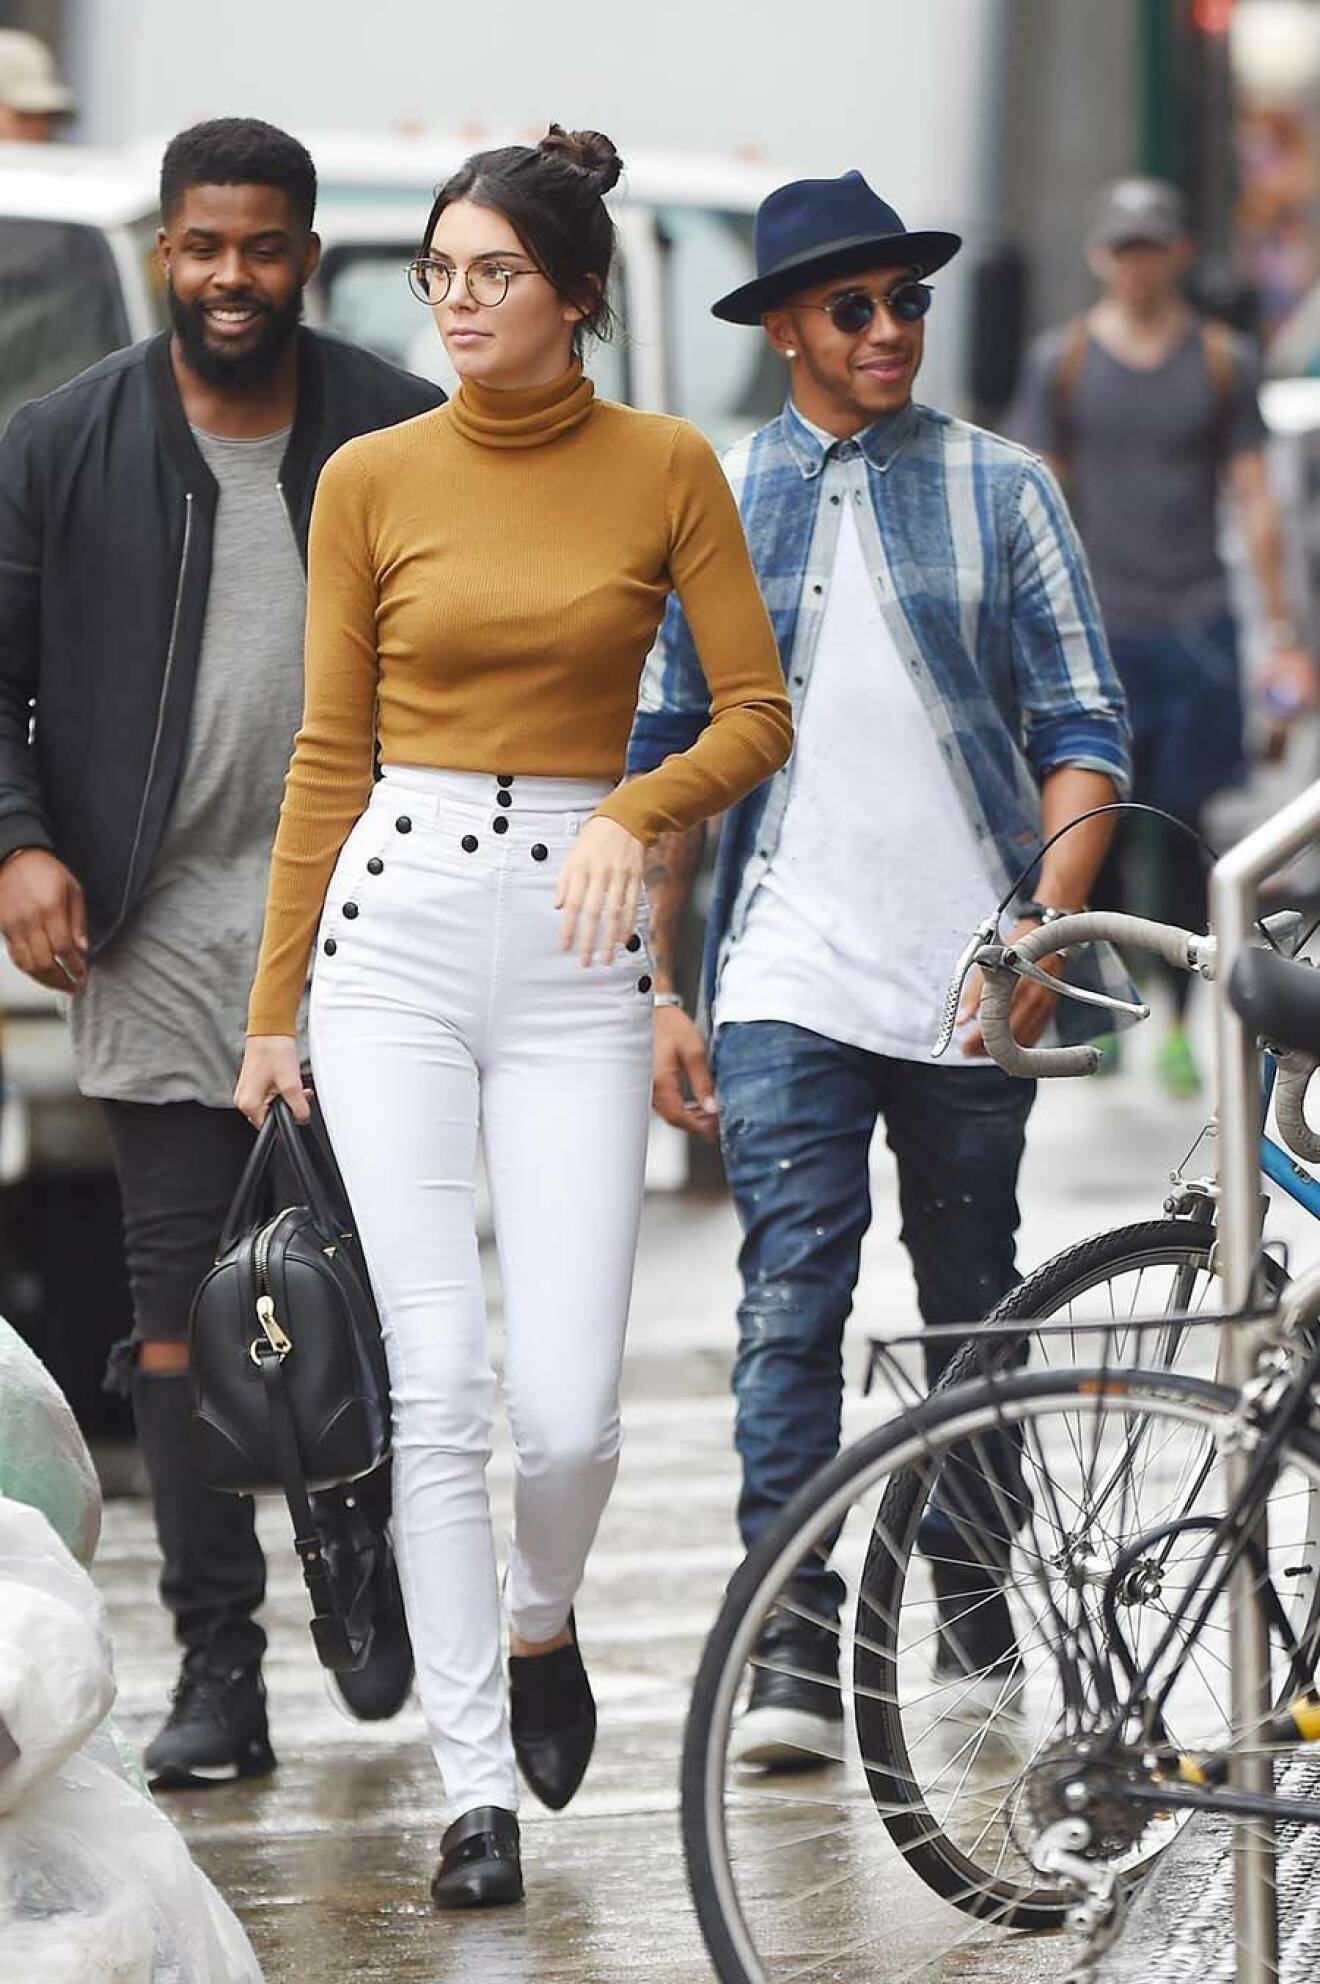 Kendall Jenner and Lewis Hamilton fuel dating rumors as they step out in NYC together